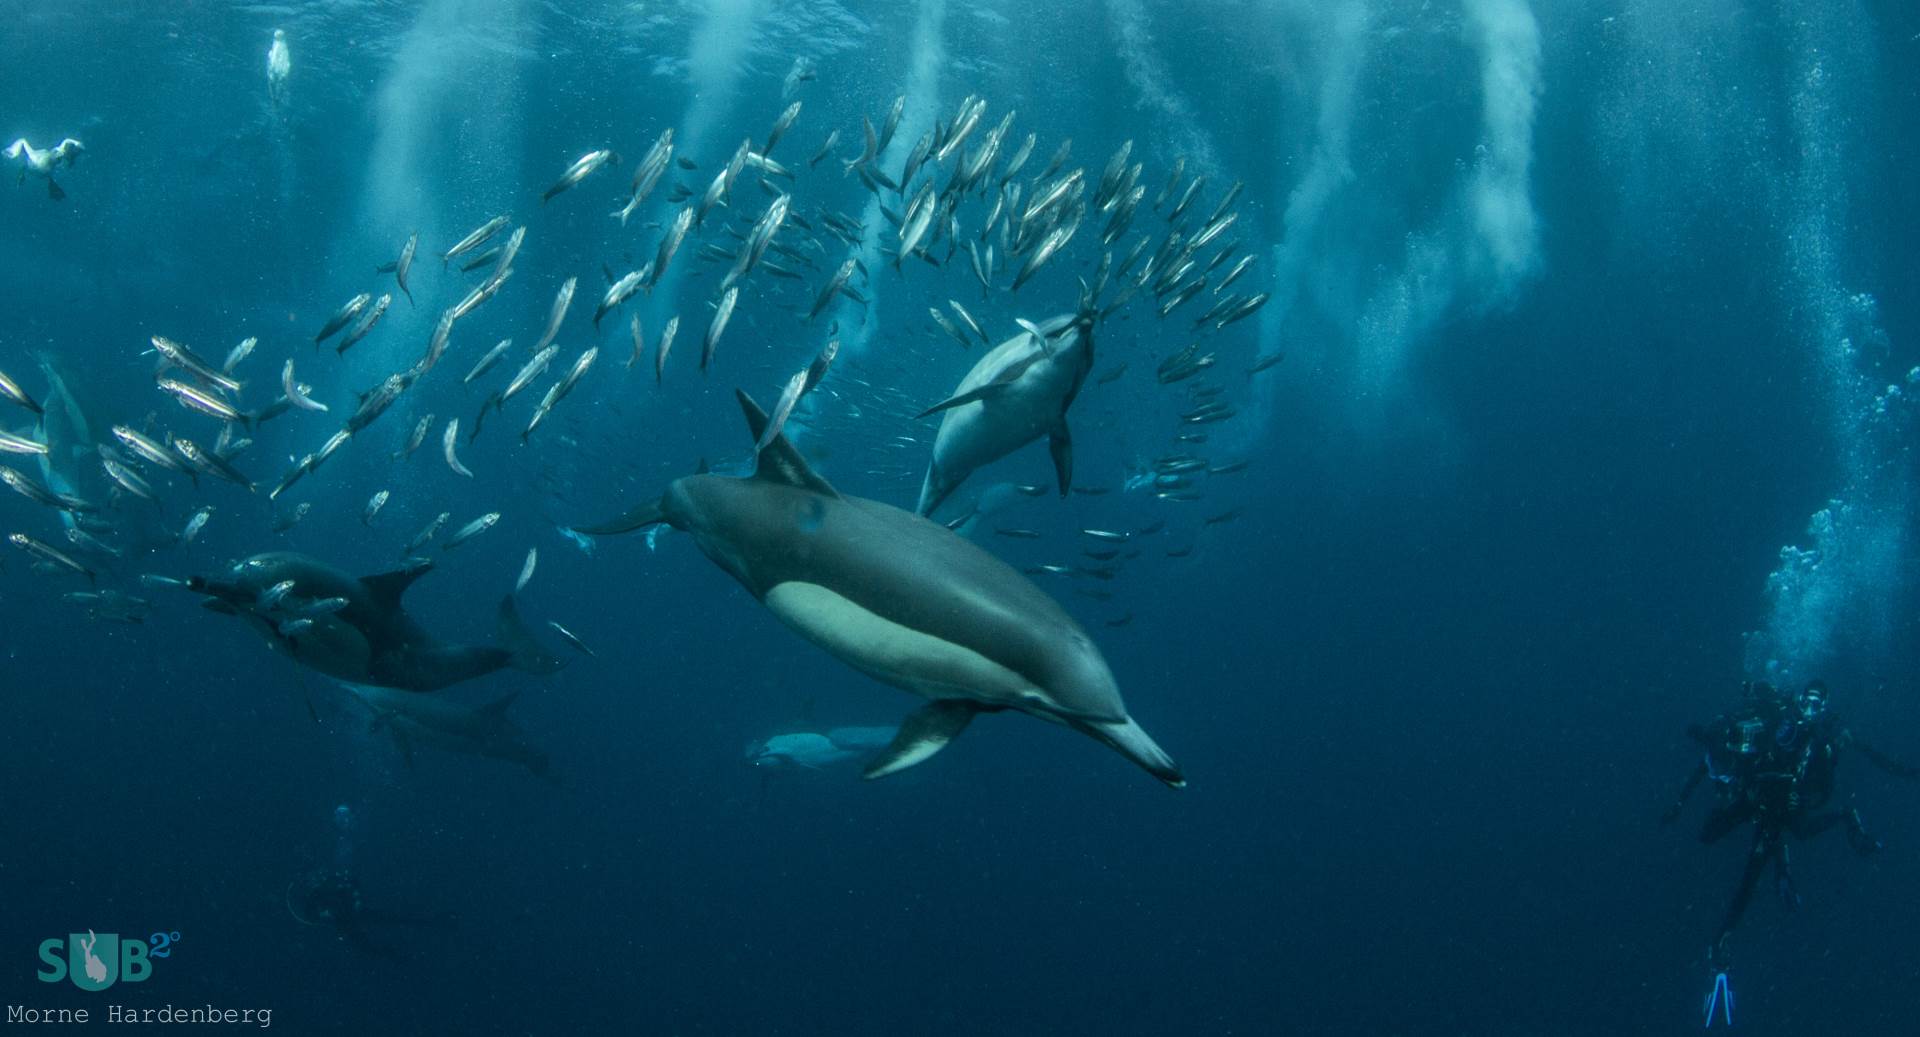 The common dolphin is the name given to two species of dolphin, making up the genus Delphinus, even though the short-beaked common dolphin has a larger range than its long-beaked counterpart.